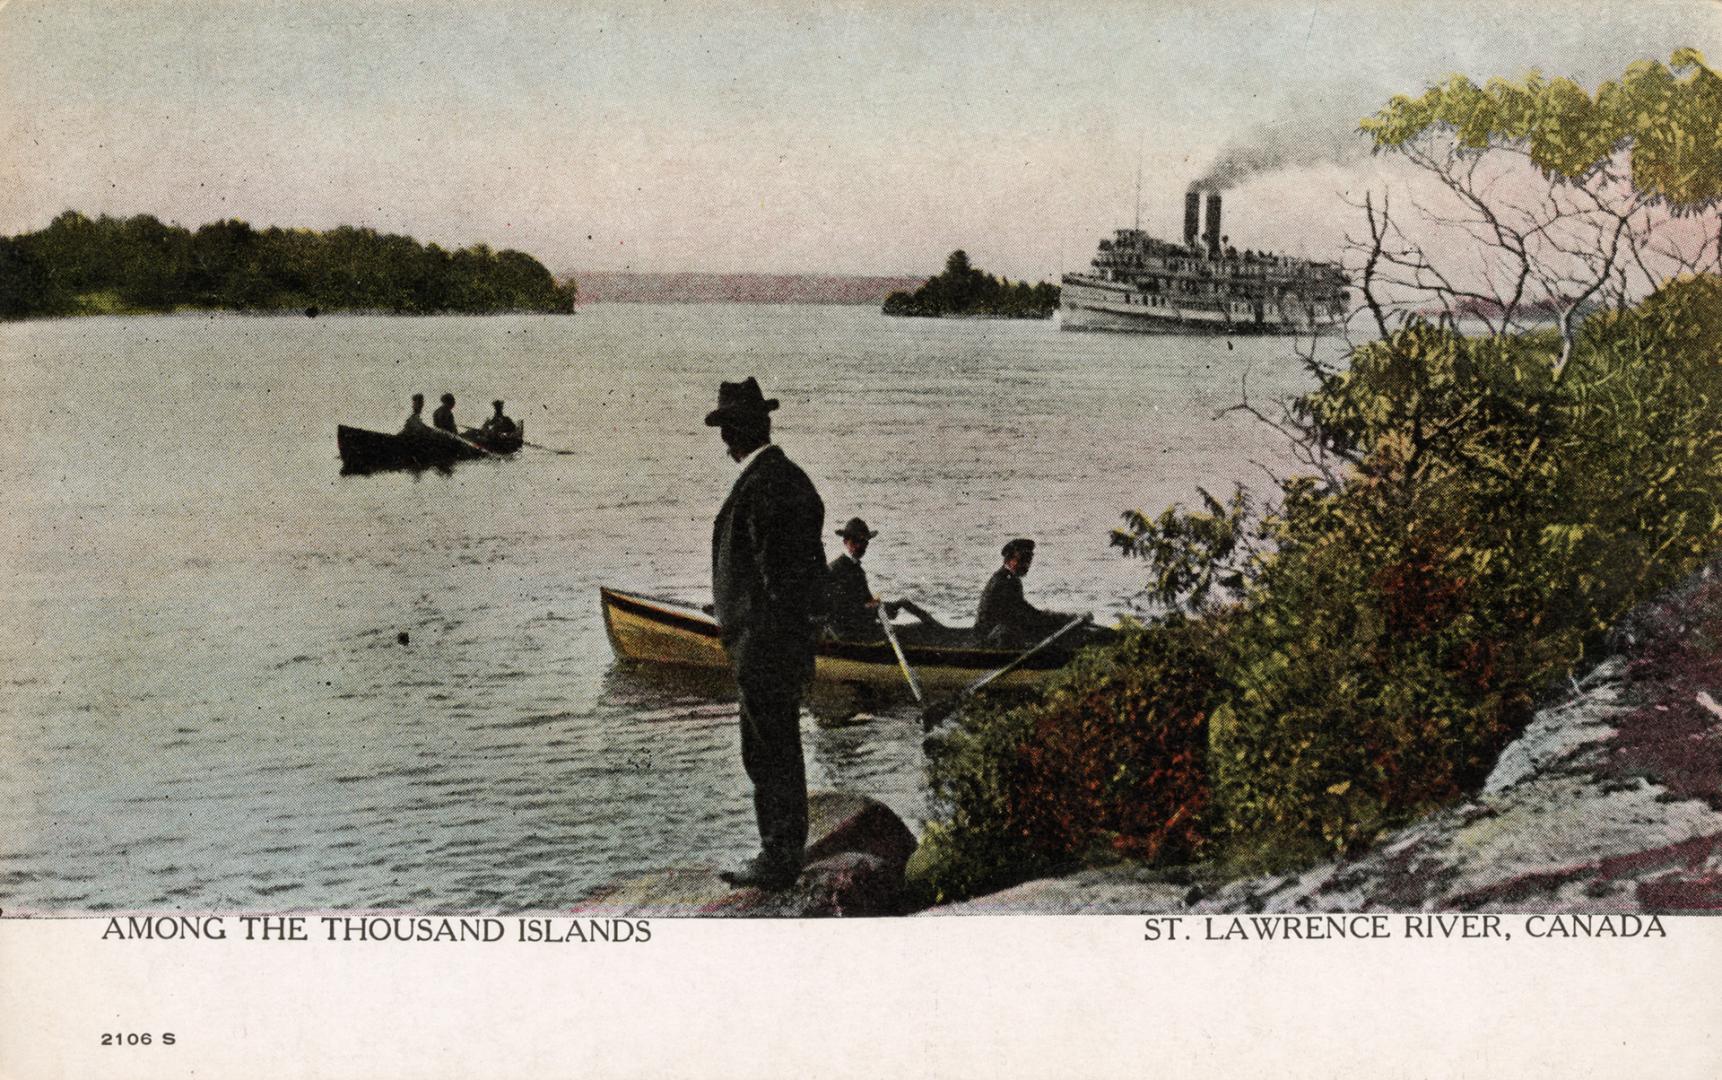 A man is standing on a shoreline watching people in row boats and a steamship in the distance.